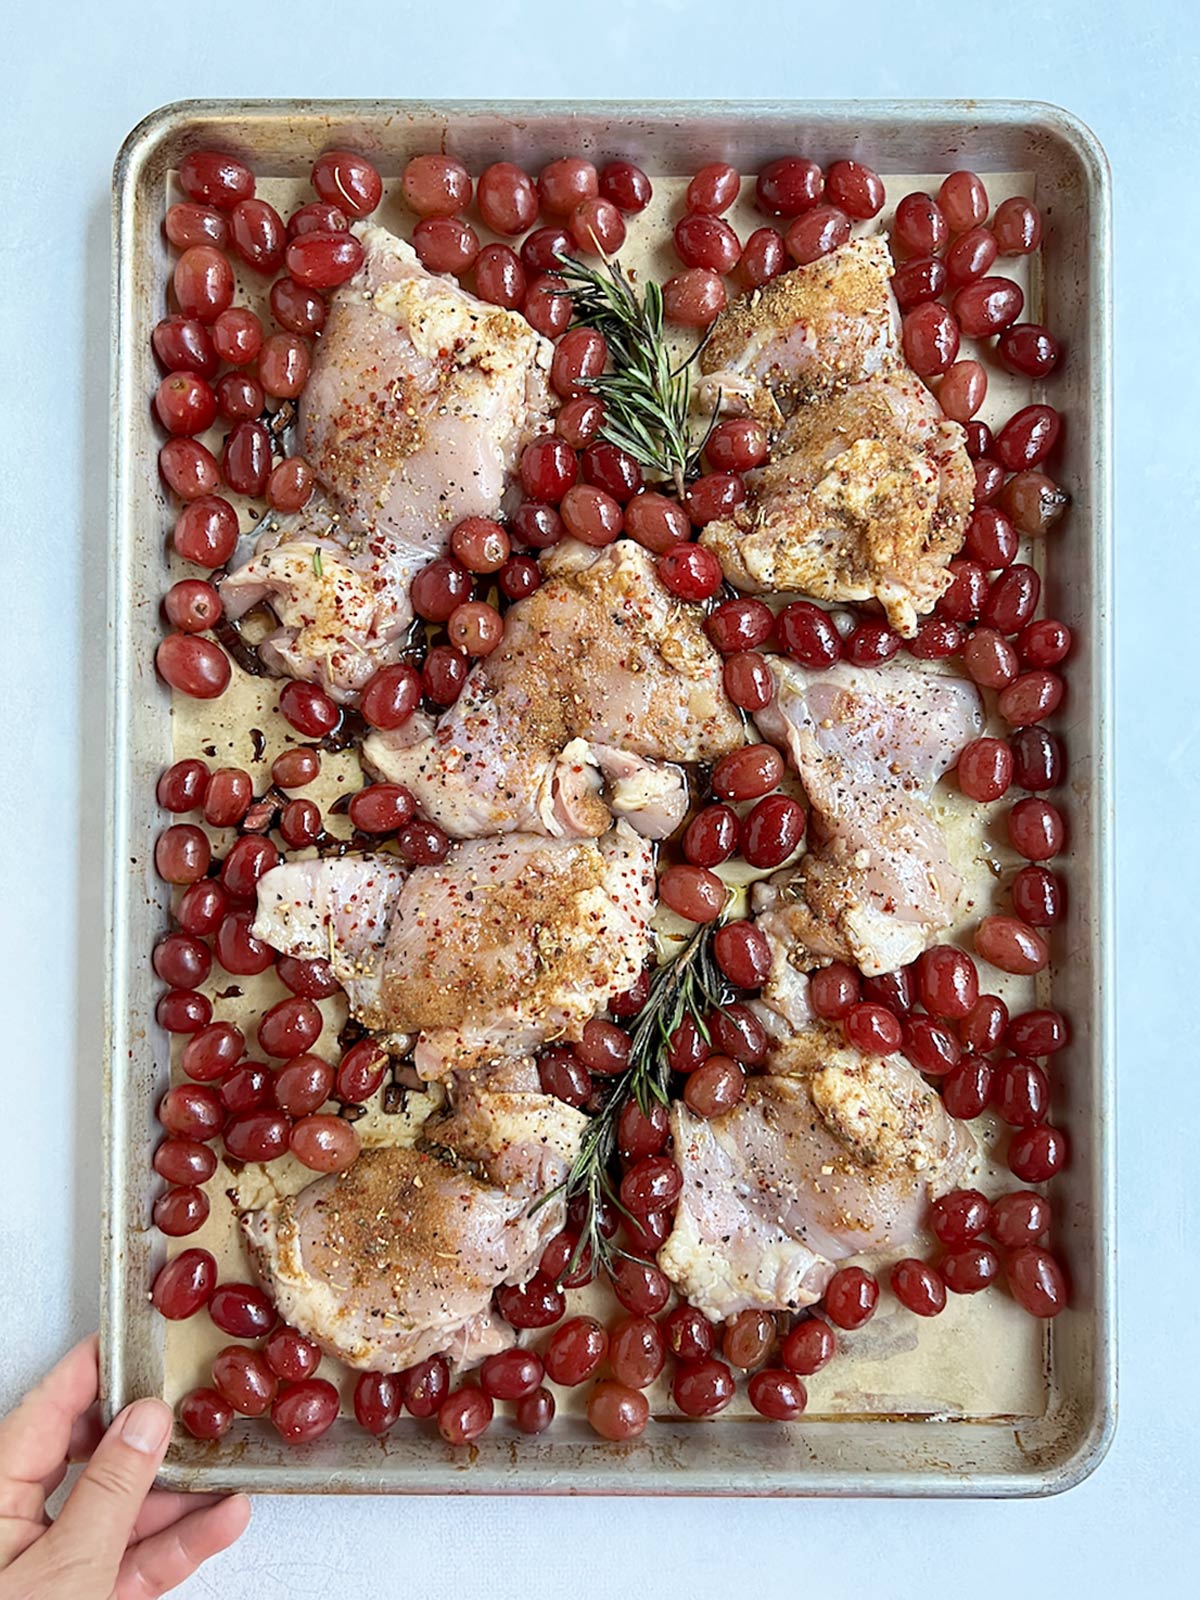 Grapes and chicken on tray uncooked.